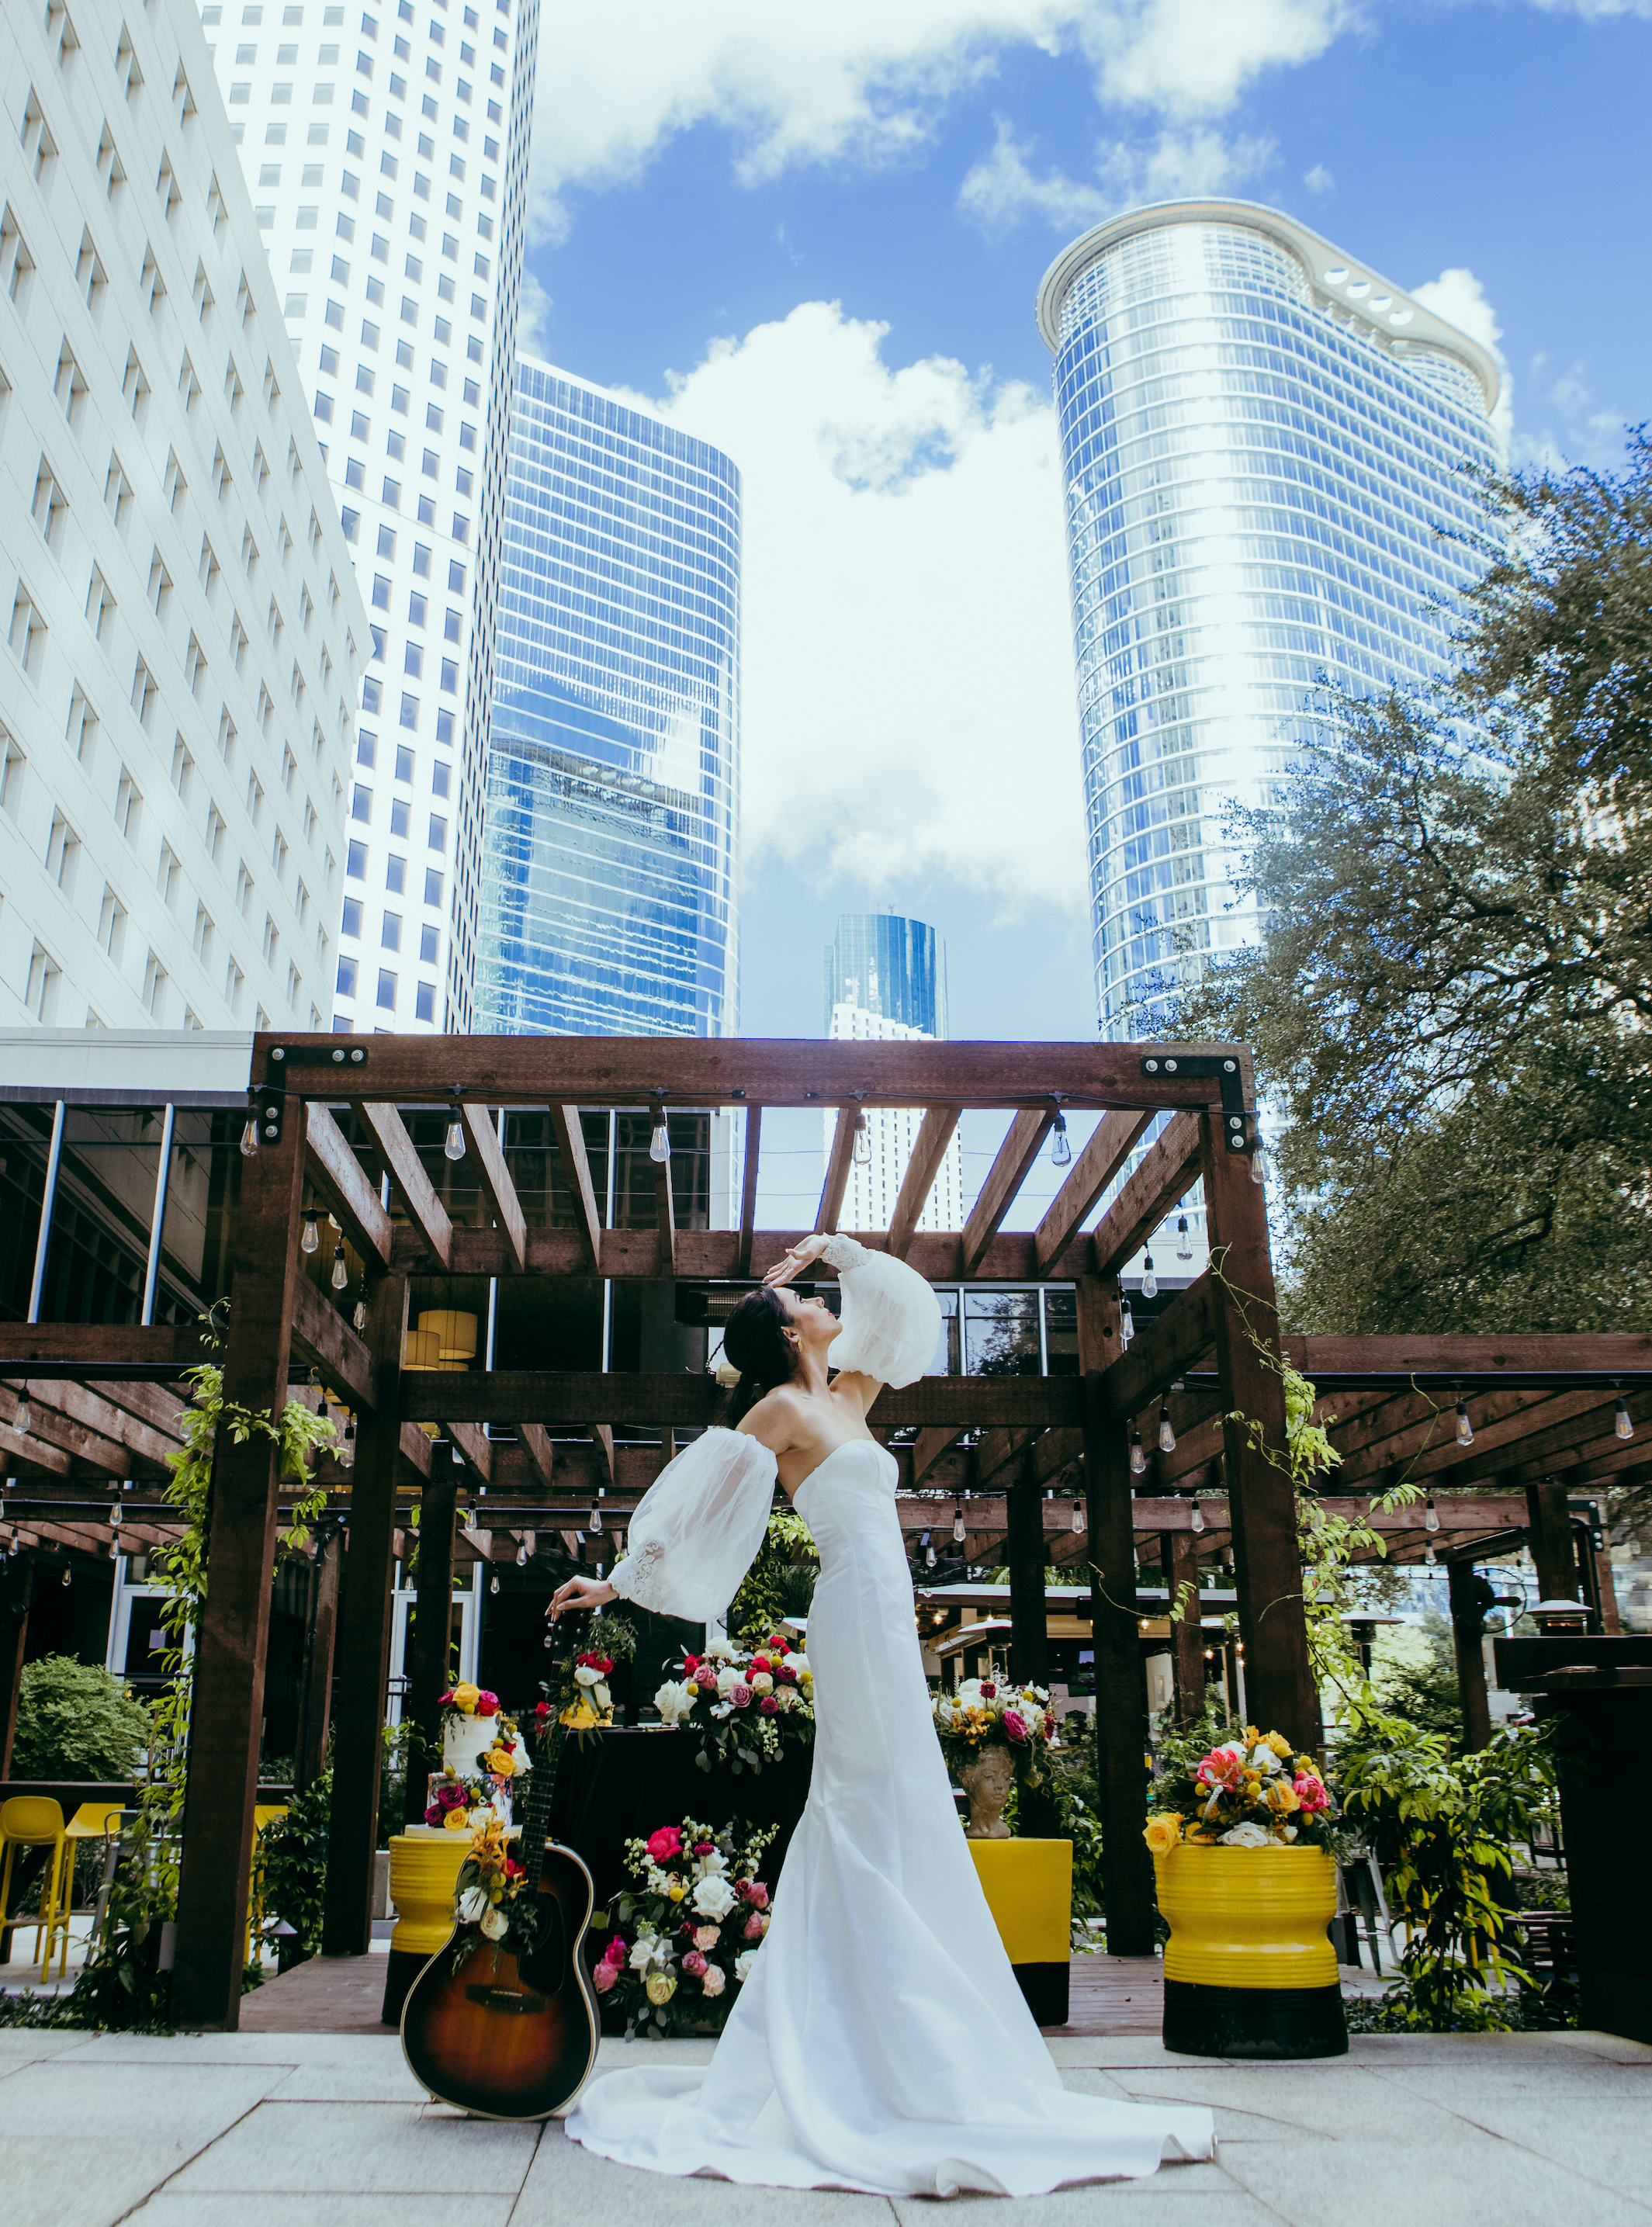 The bride leans on a guitar outside of The Whitehall Hotel in Houston, TX.